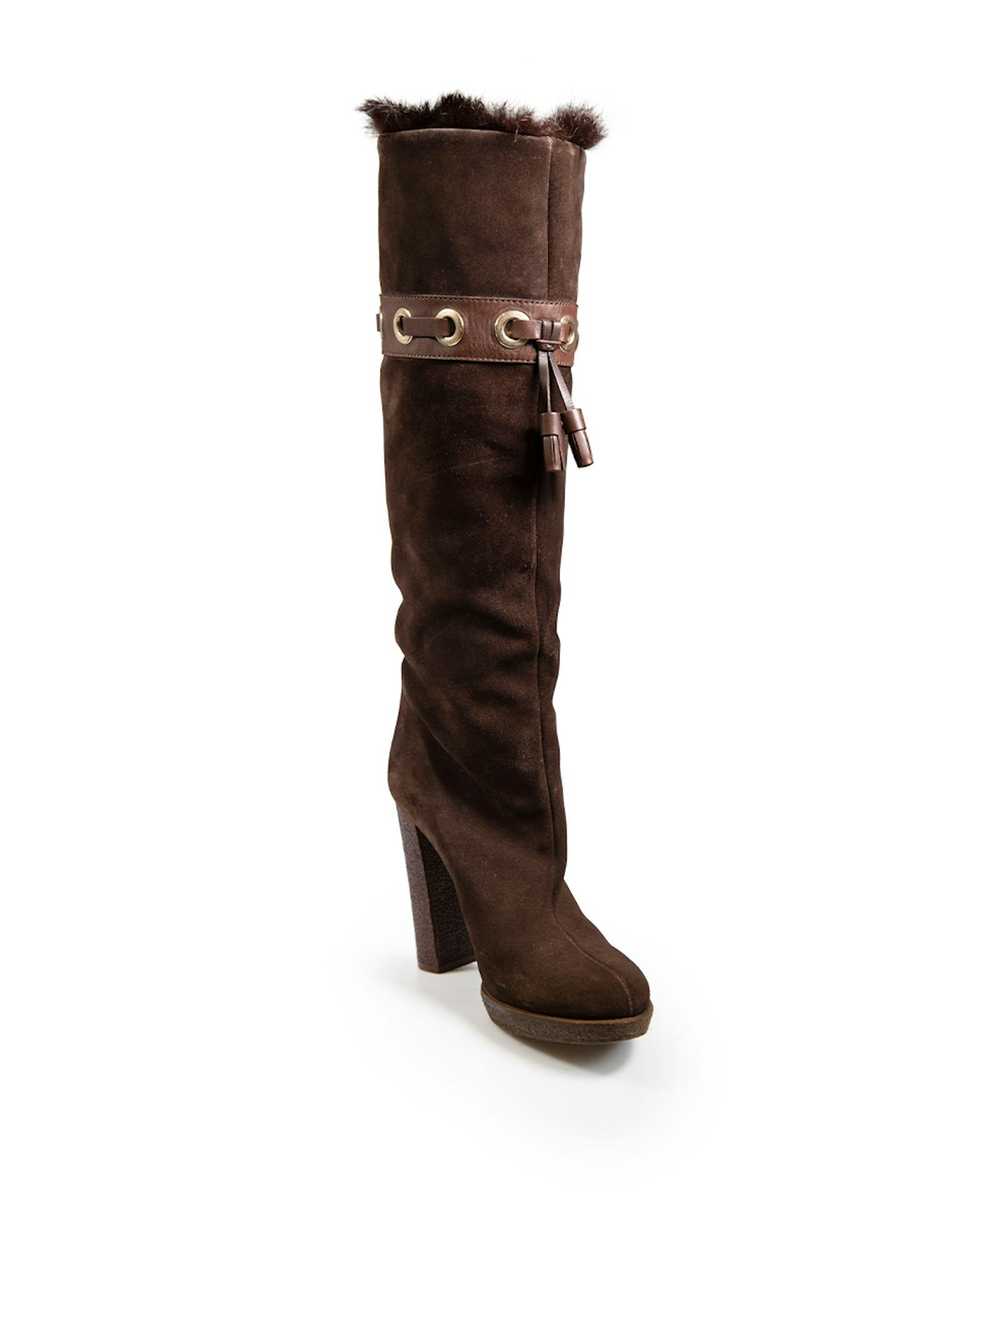 Gucci Brown Suede Fur Lined Tassels Accent Boots - image 2